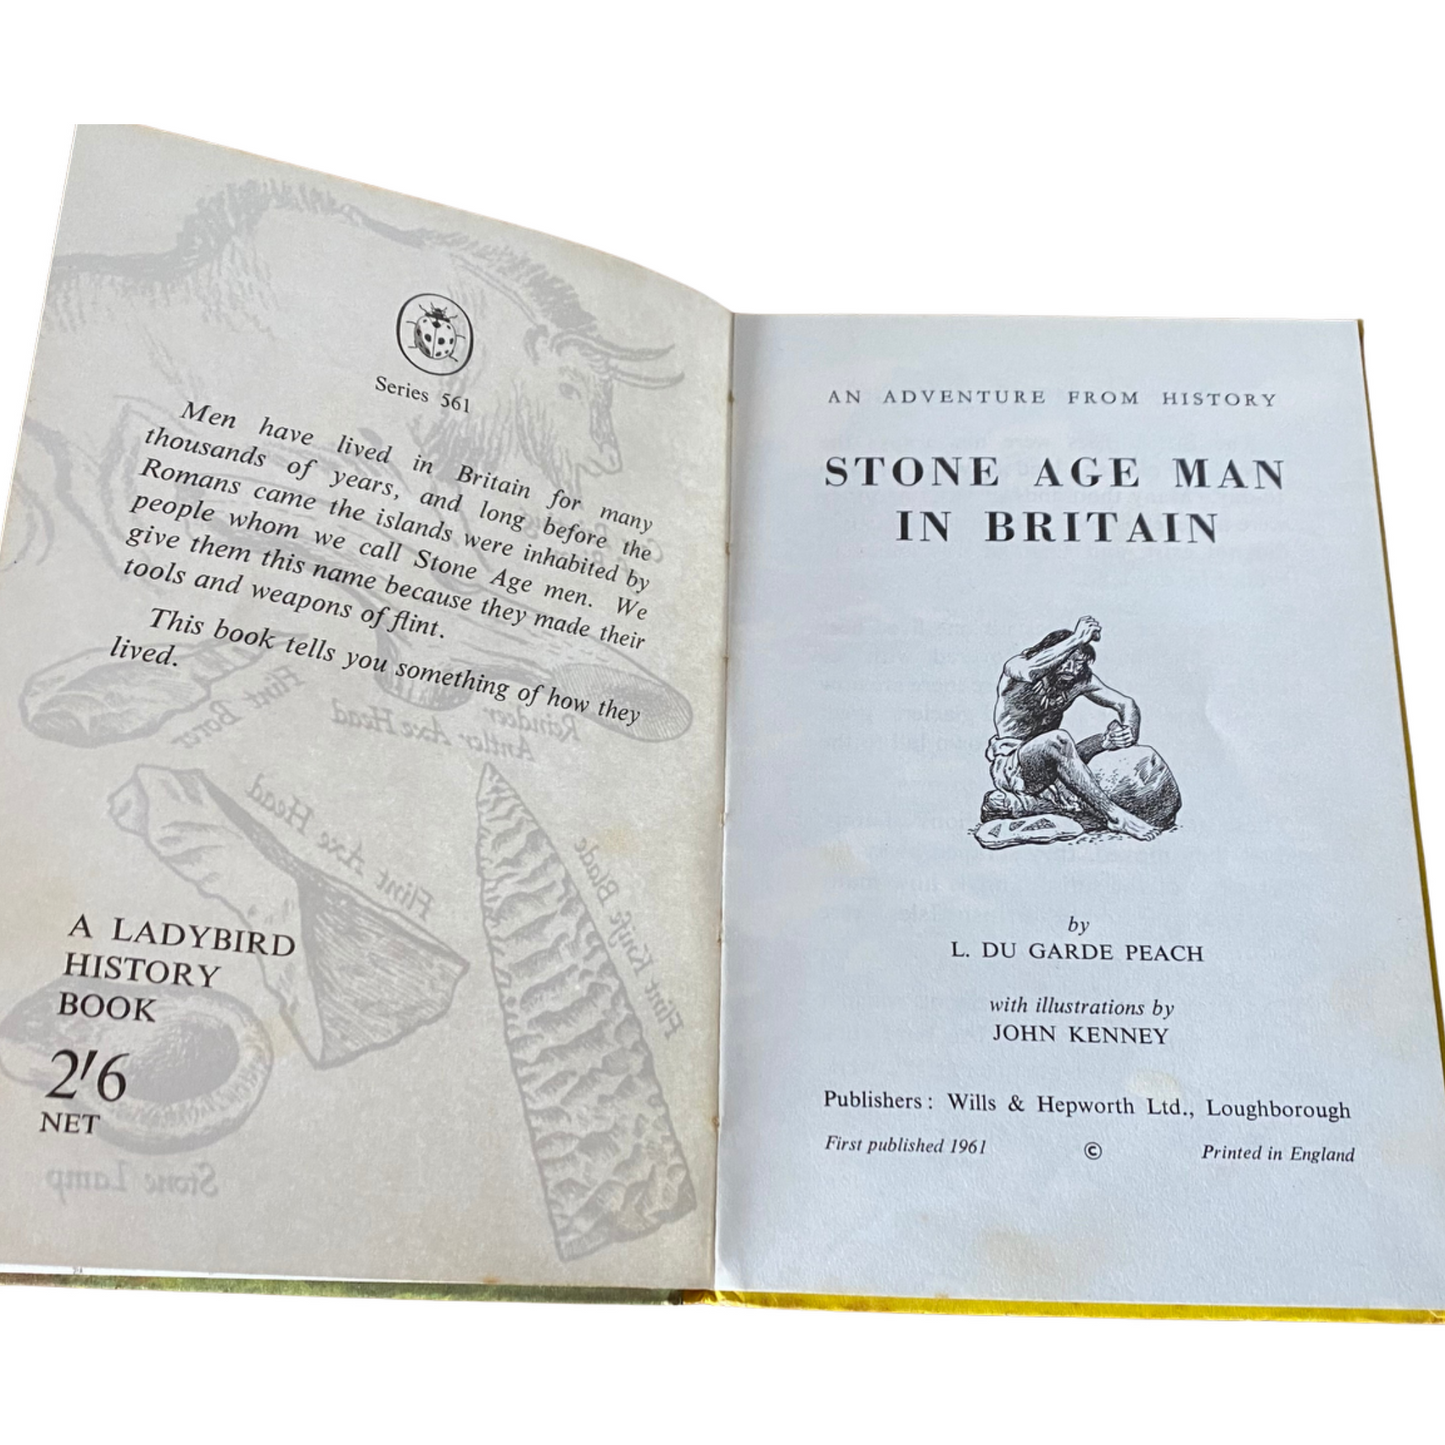 Vintage 1960s ladybird book, Stone Age Man in Britain  , An Adventure from History. Series 561. Great gift idea